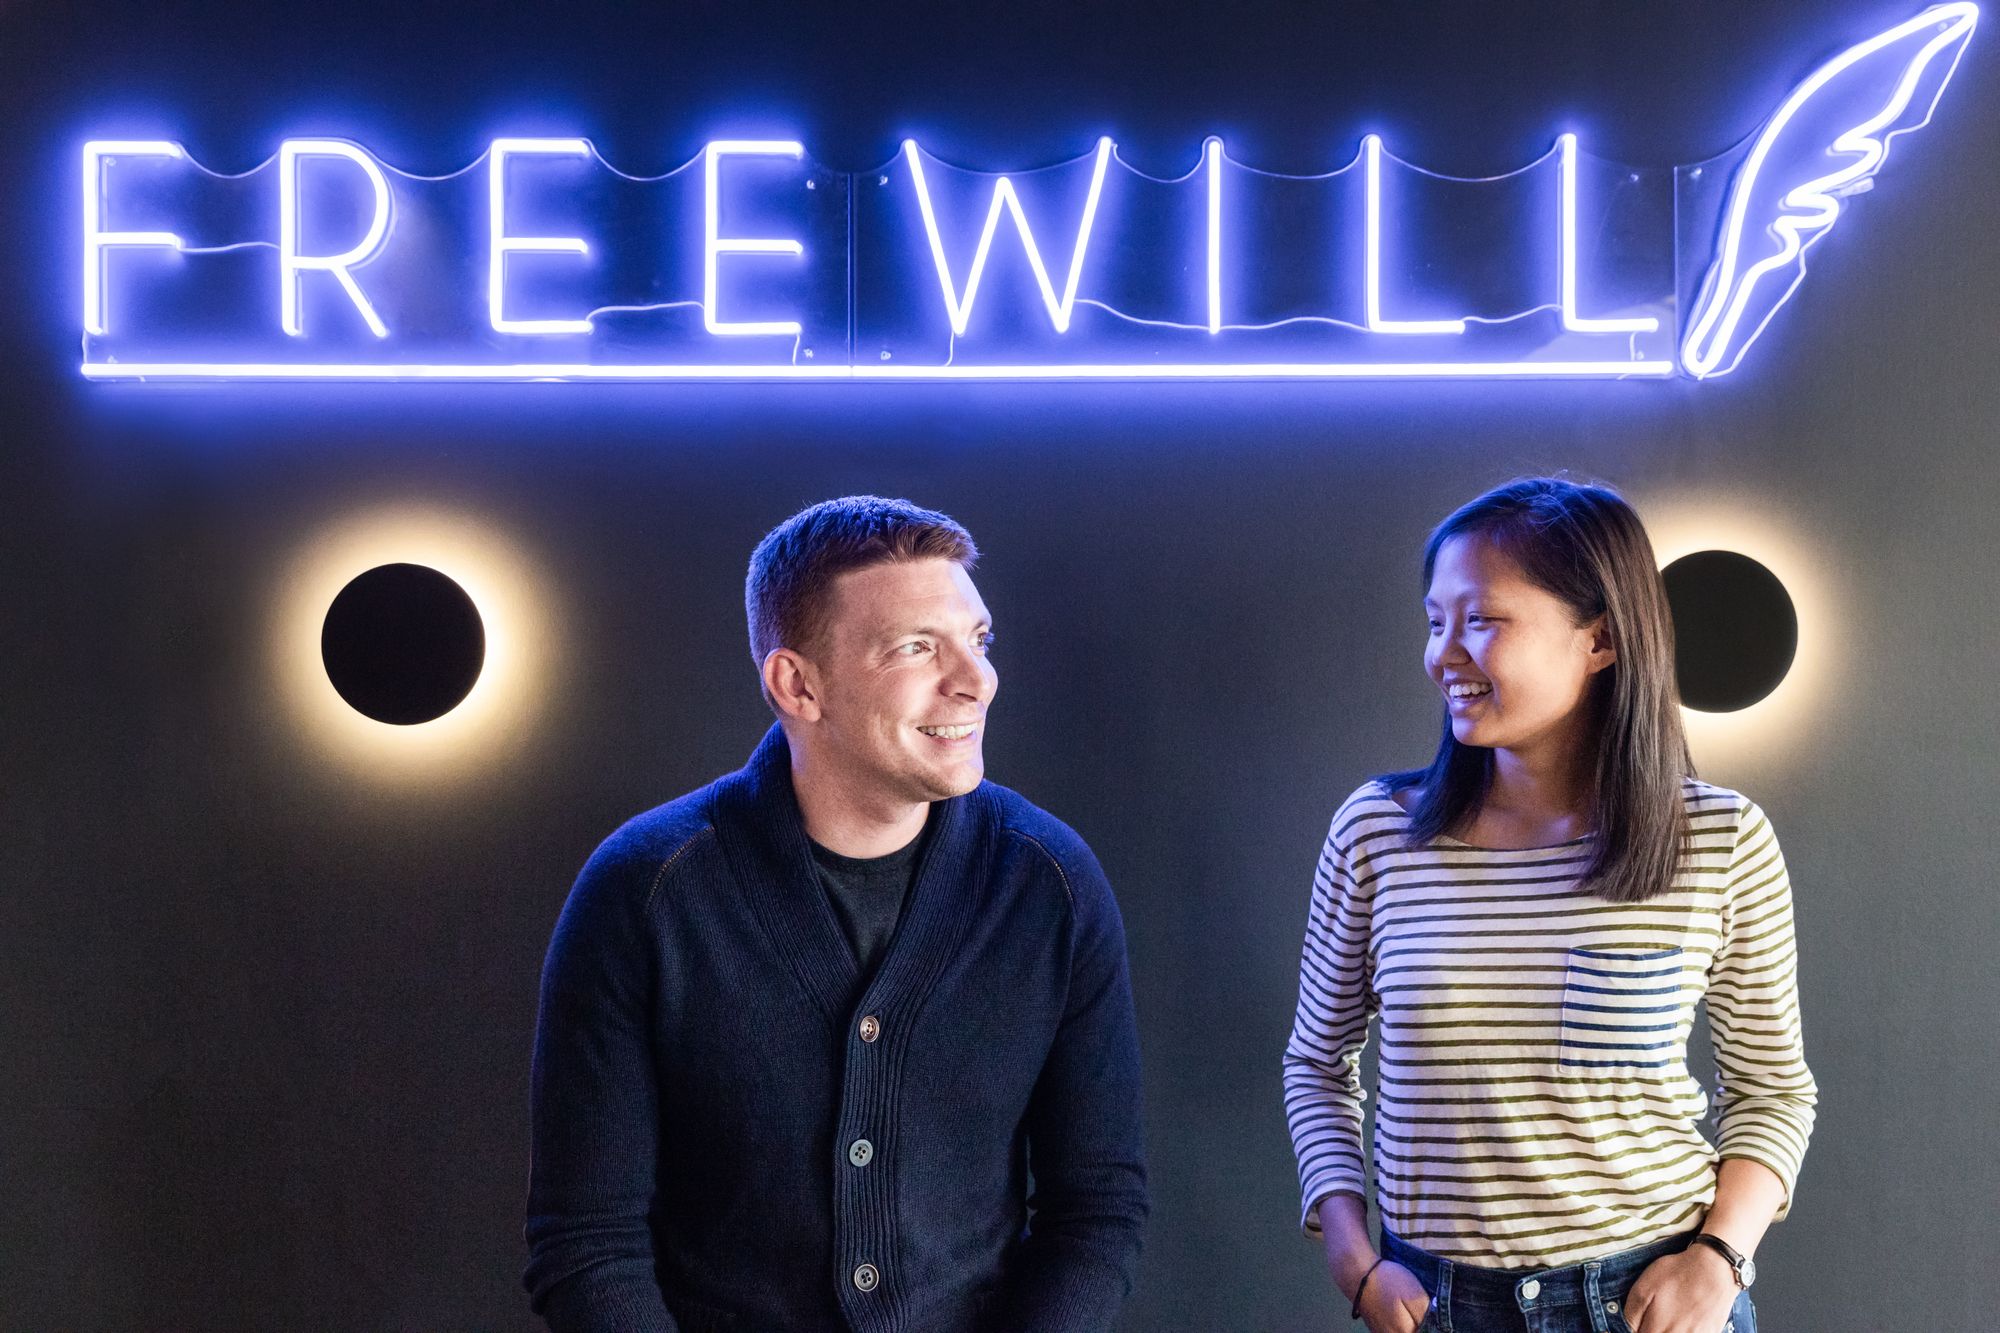 Meet FreeWill, the Social Enterprise Aiming to Channel $1 Trillion Towards Charity Over the Next Decade